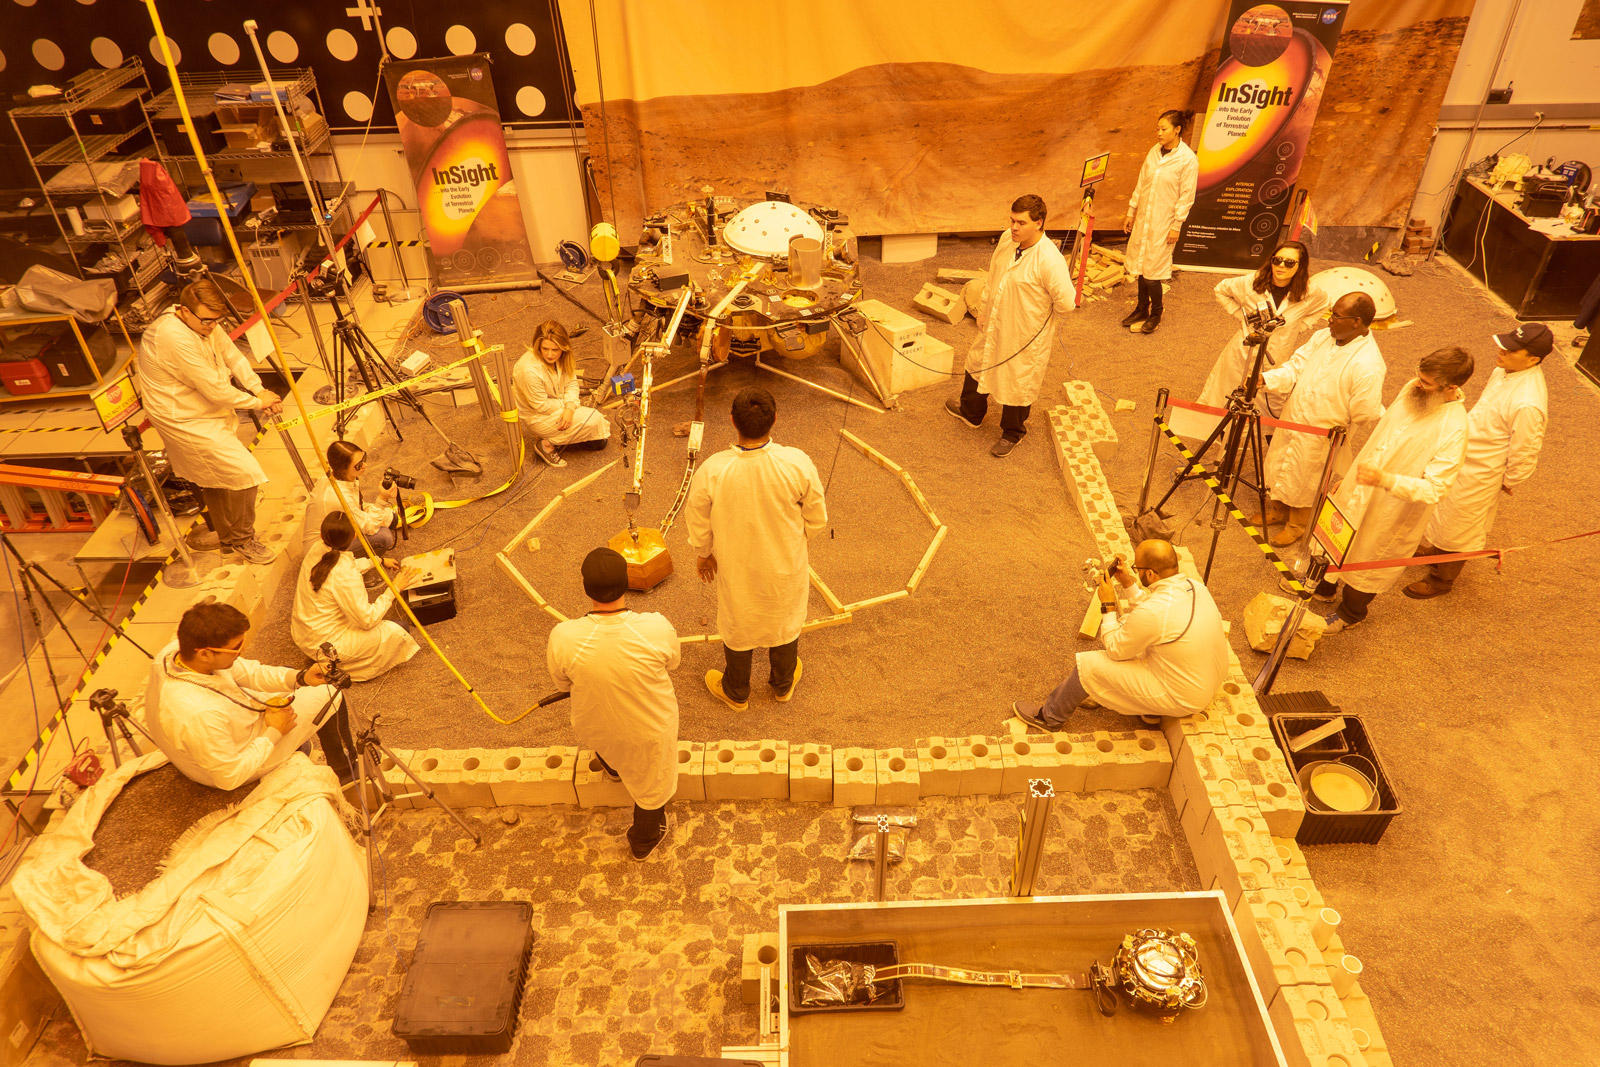 Engineers practice deploying InSight's instruments in a lab at NASA's Jet Propulsion Laboratory in Pasadena, California. Several of them are wearing sunglasses to block the bright yellow lights in the test space, which mimic sunlight as it appears on Mars.